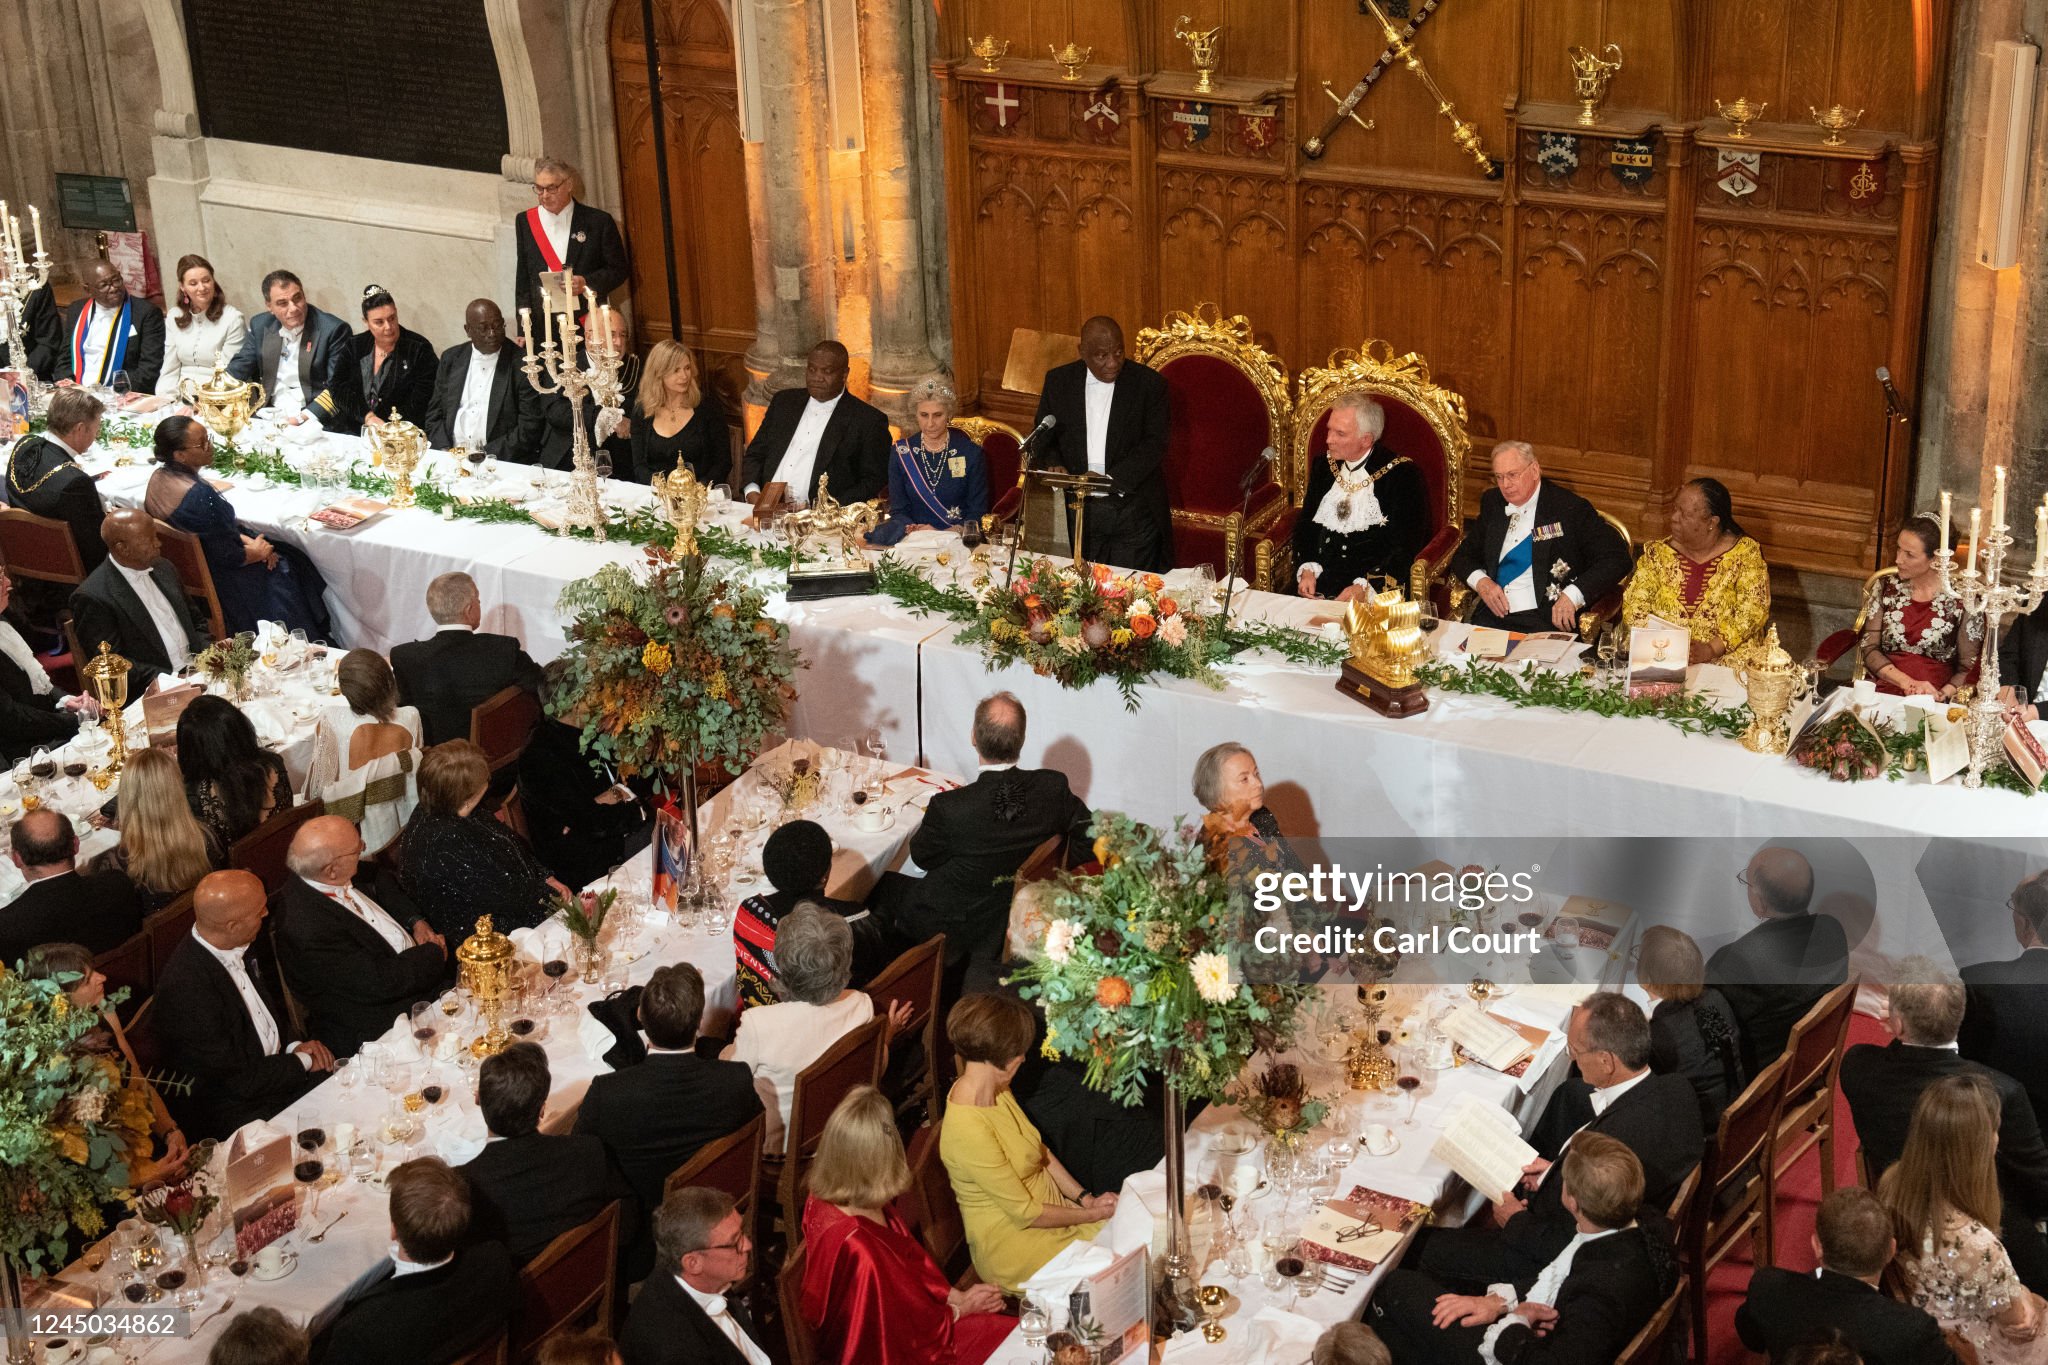 the-president-of-the-republic-of-south-africa-visits-the-united-kingdom-day-2.jpg?s=2048x2048&w=gi&k=20&c=-EfwrEvpJa3znKoKumm5E-1OpGuusFOY5eqcXfsy1dw=